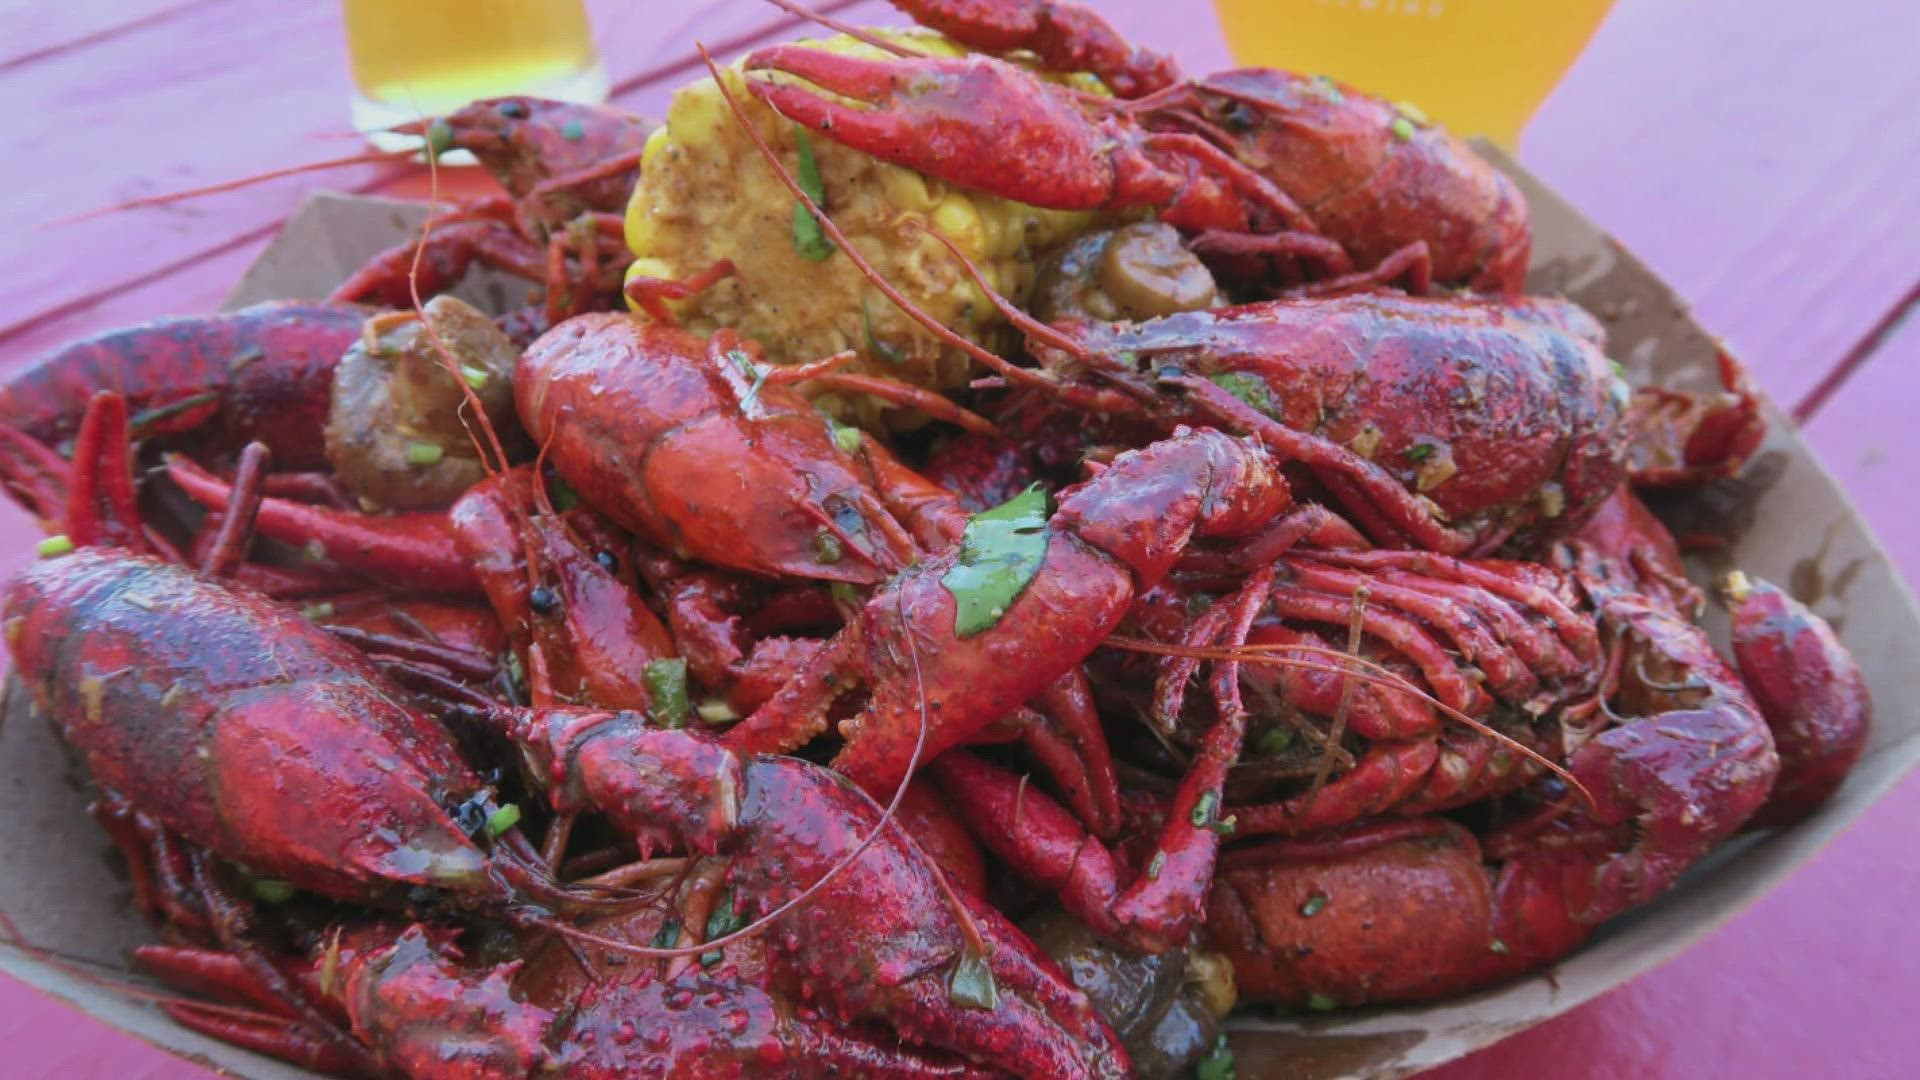 The Louisiana crawfish festival is from March 23 to 26 in St. Bernard Parish at the Frederick Sigur Civic Center